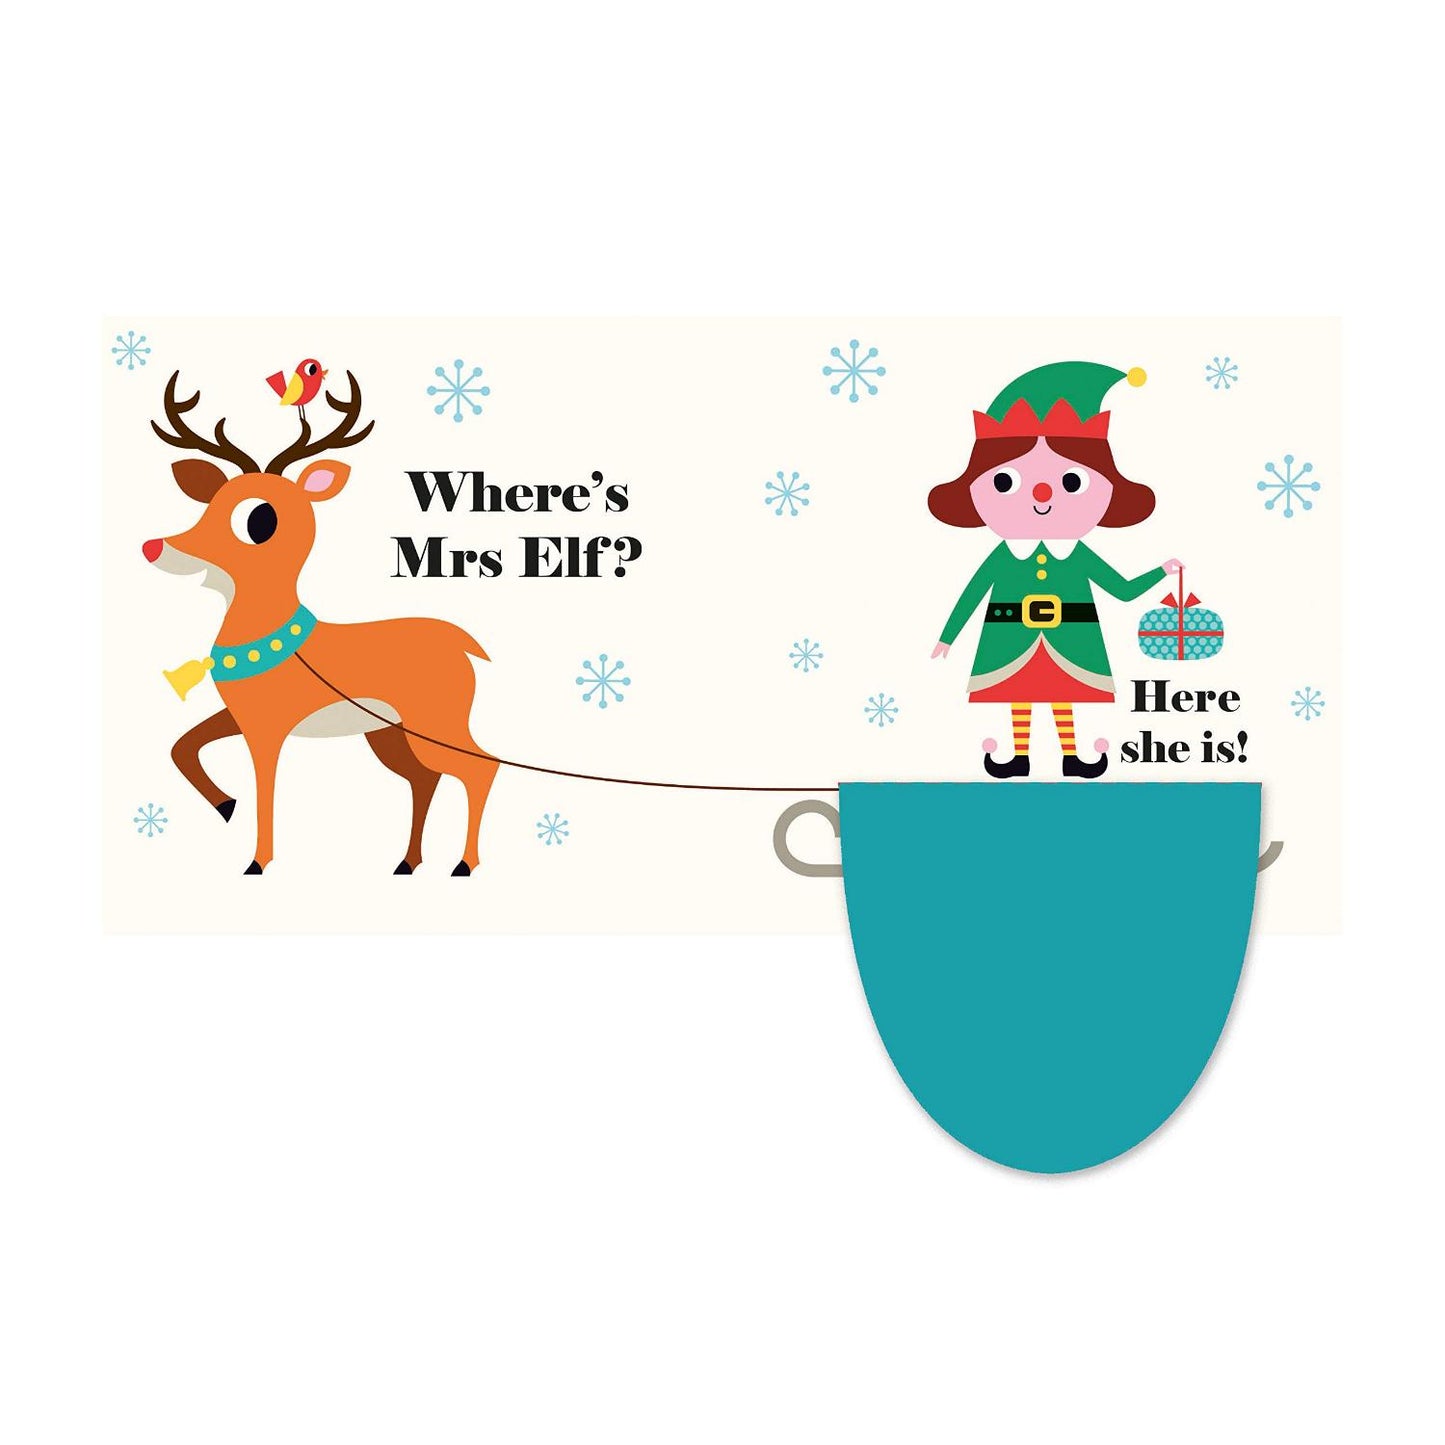 Where's Santa Claus? | Felt Flaps Board Book for Babies & Toddlers